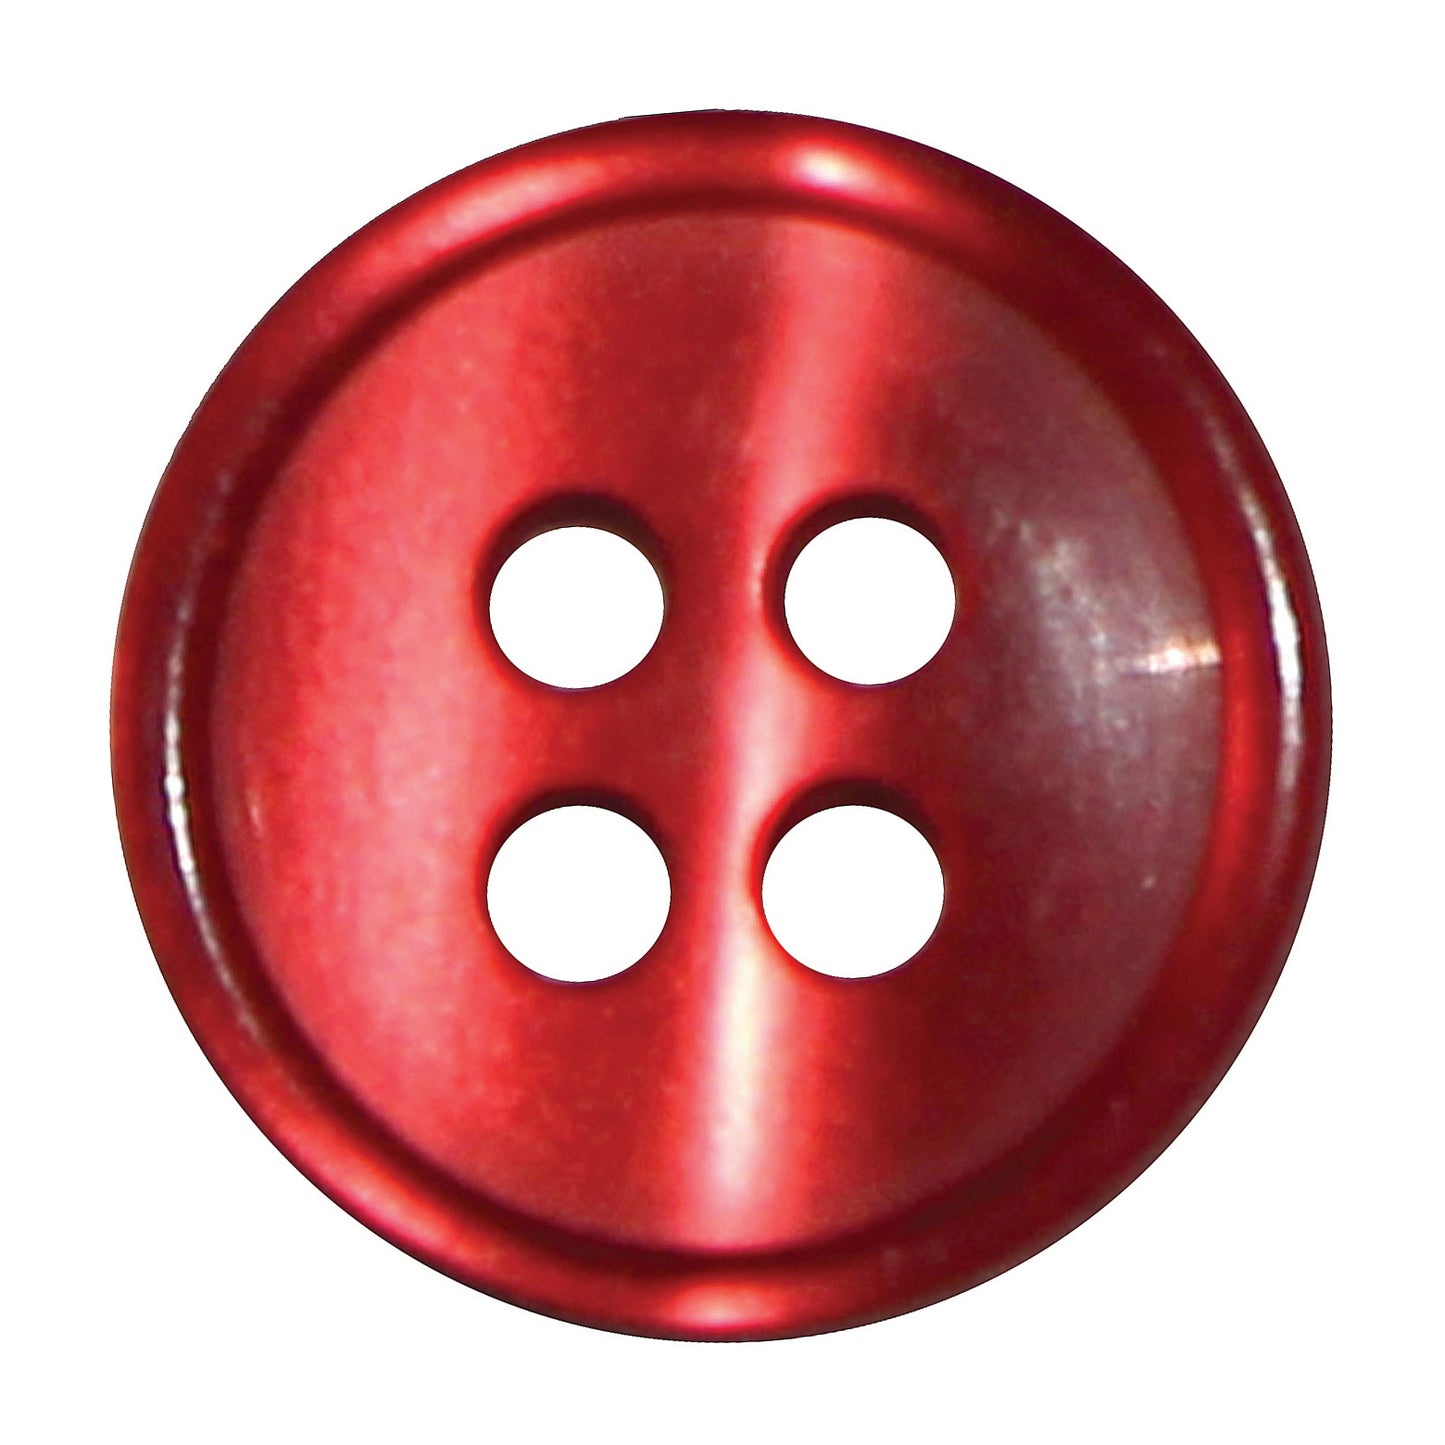 4 Hole Button - 13mm - Red [LD21.2]